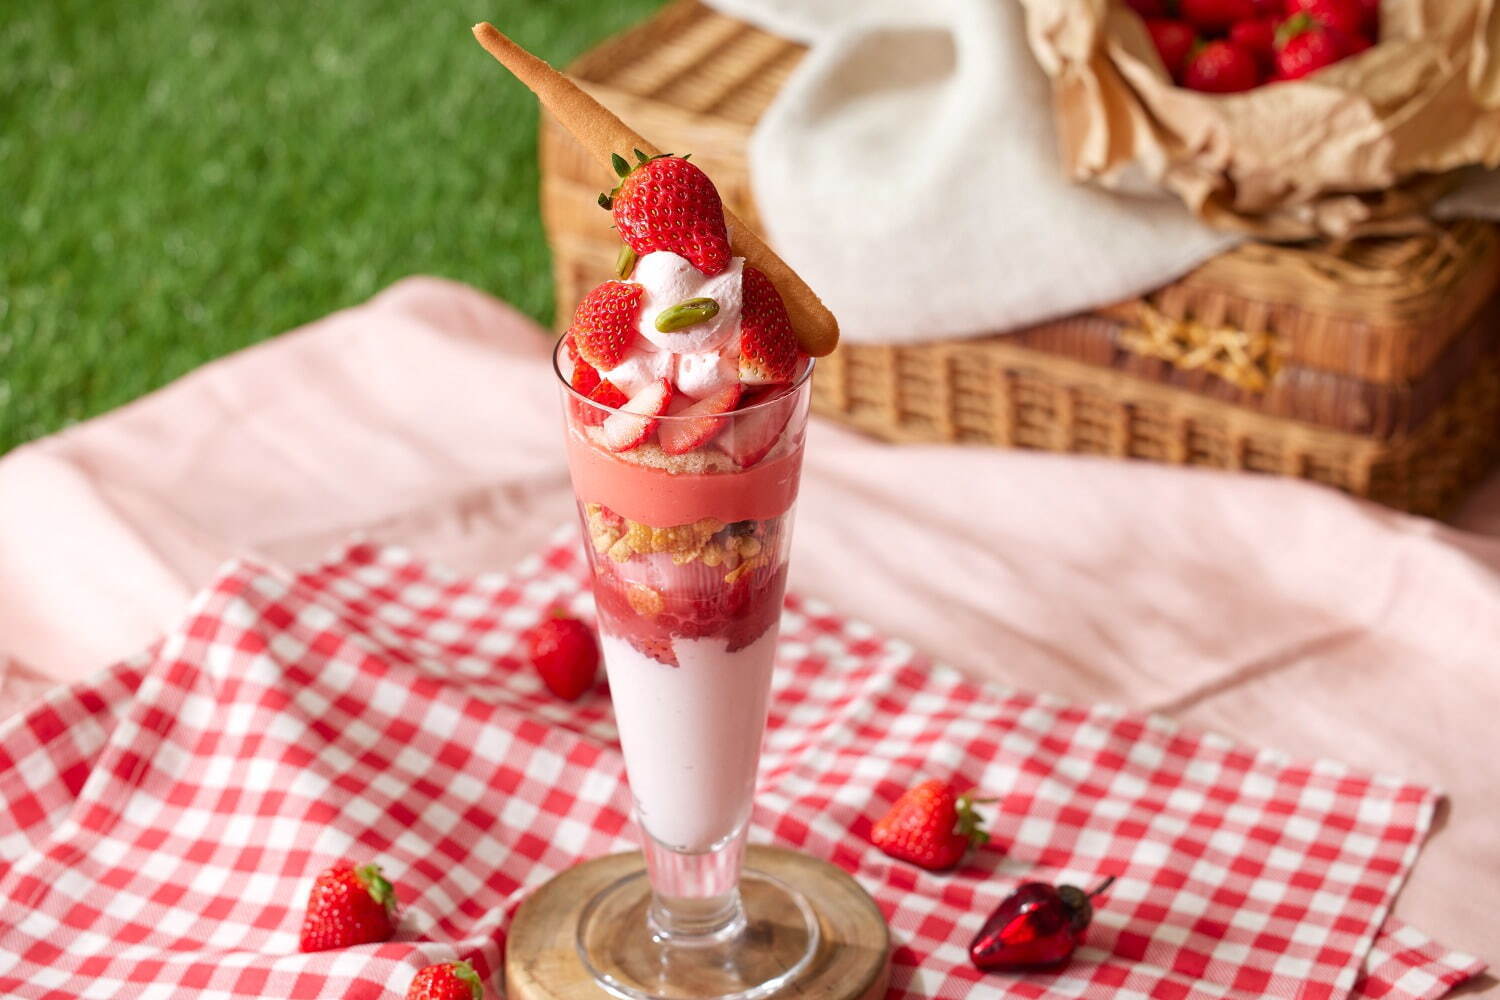 「Color Parfait～Strawberry Red～」2,500円